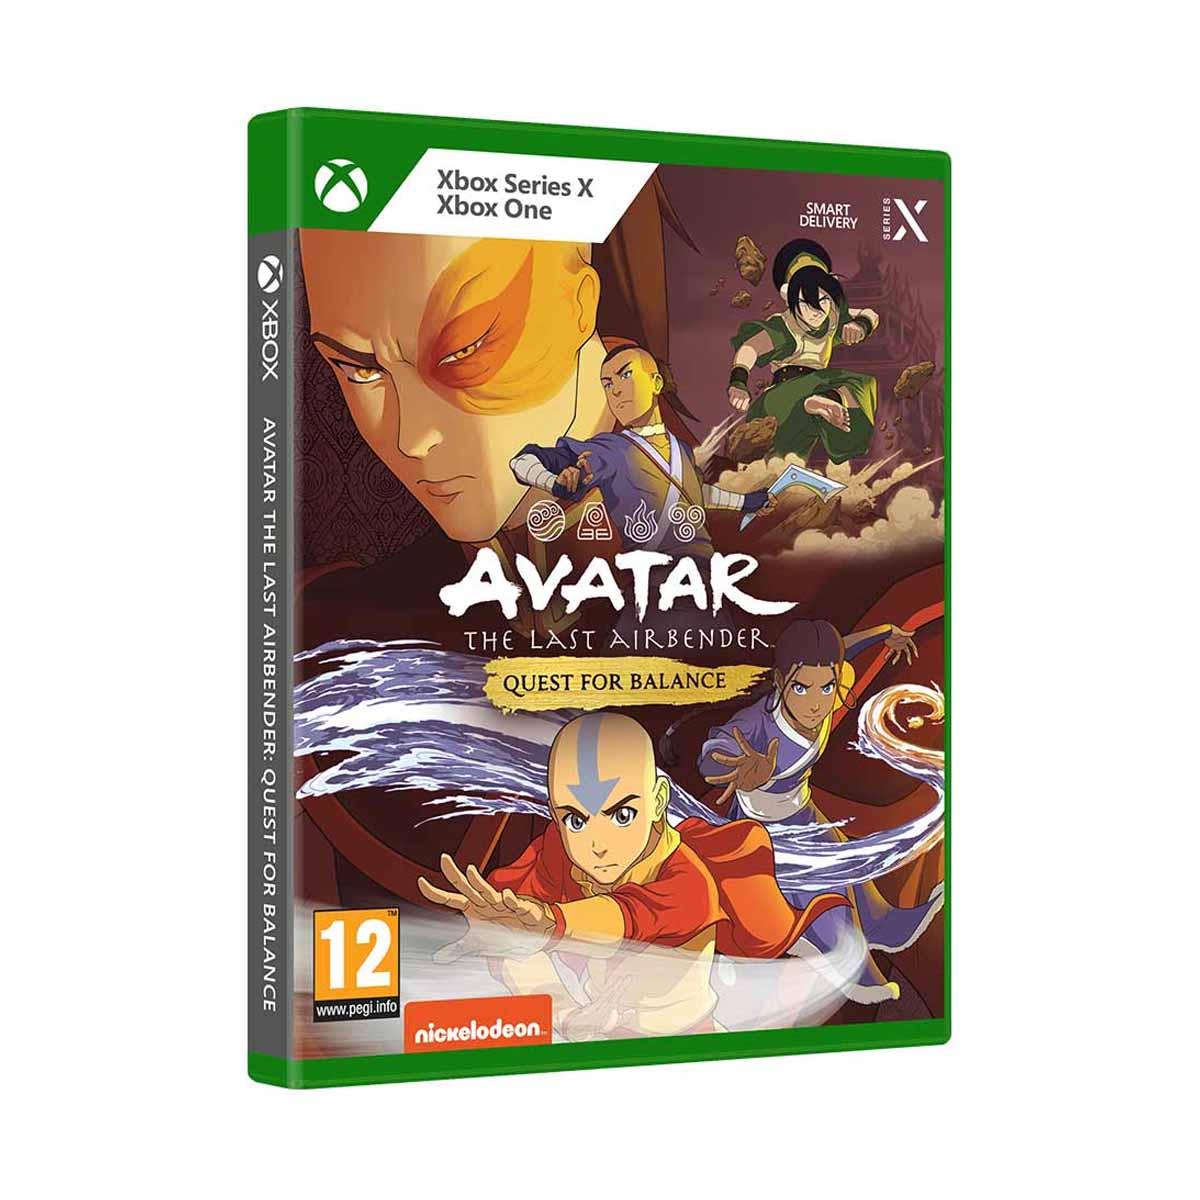 Image of Avatar: The Last Airbender - Quest for Balance